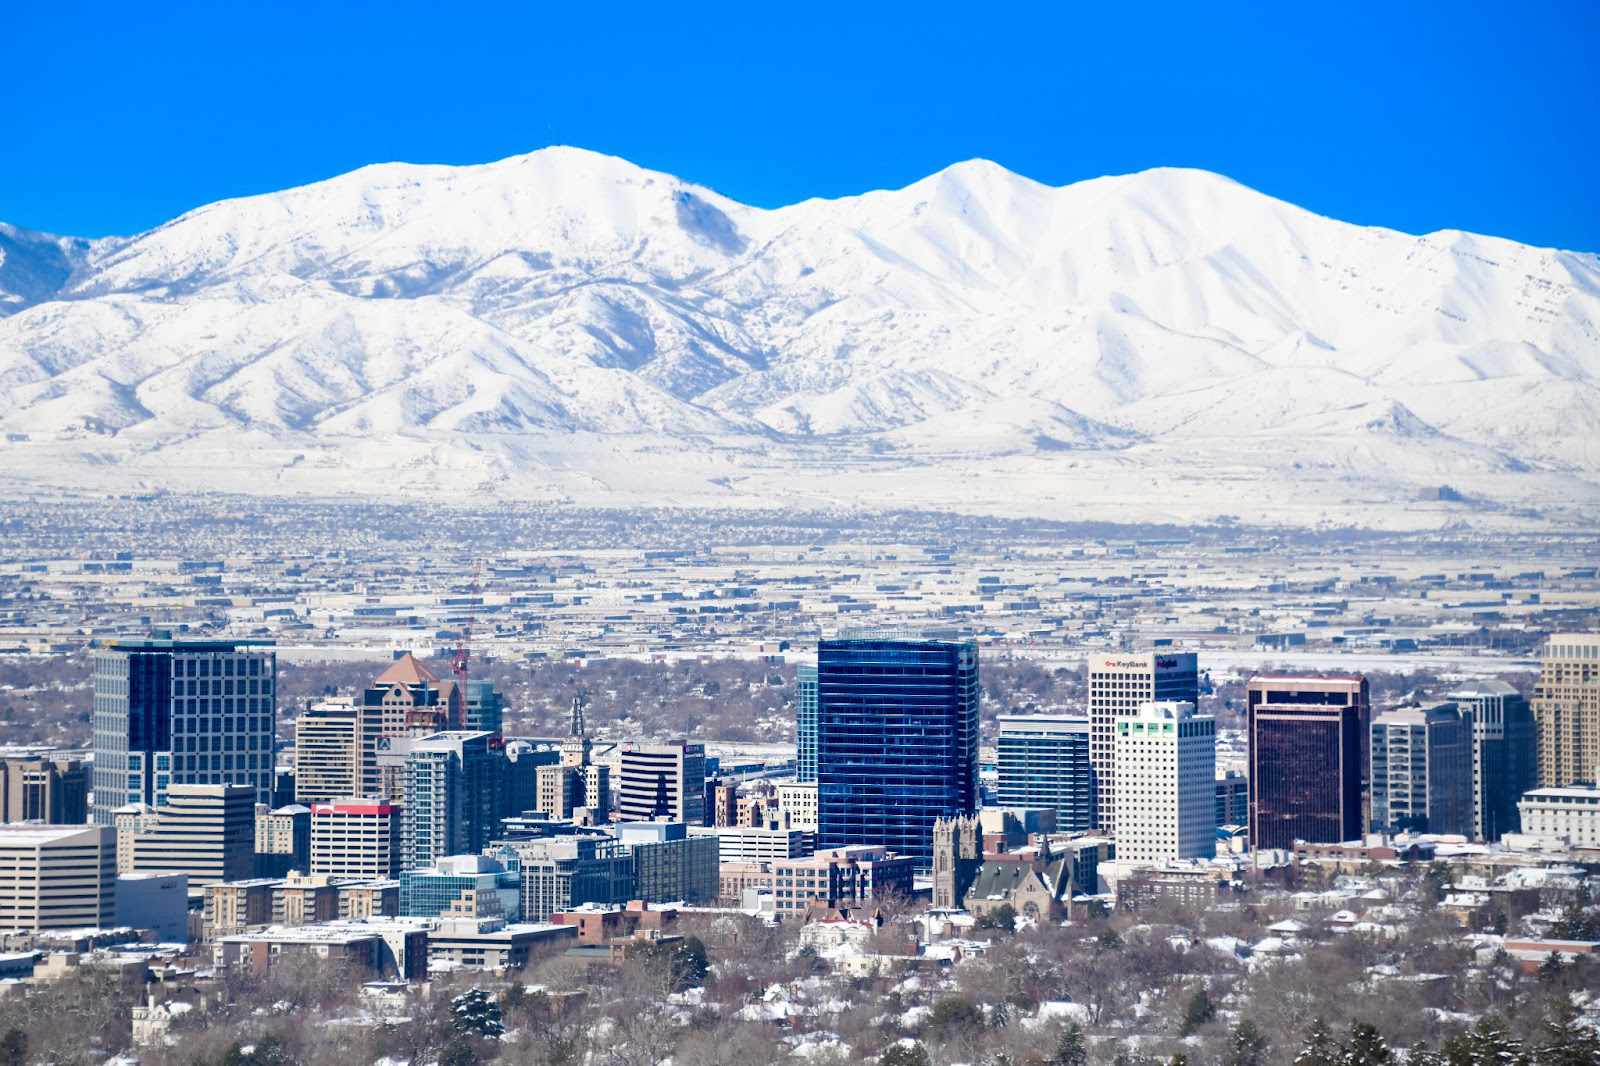 Salt Lake City is a popular city of Utah that is a filming location for the new Lindsay Lohan Christmas movie. 
Pictured: a view of Salt Lake City with snow capped mountains and the cityscape 